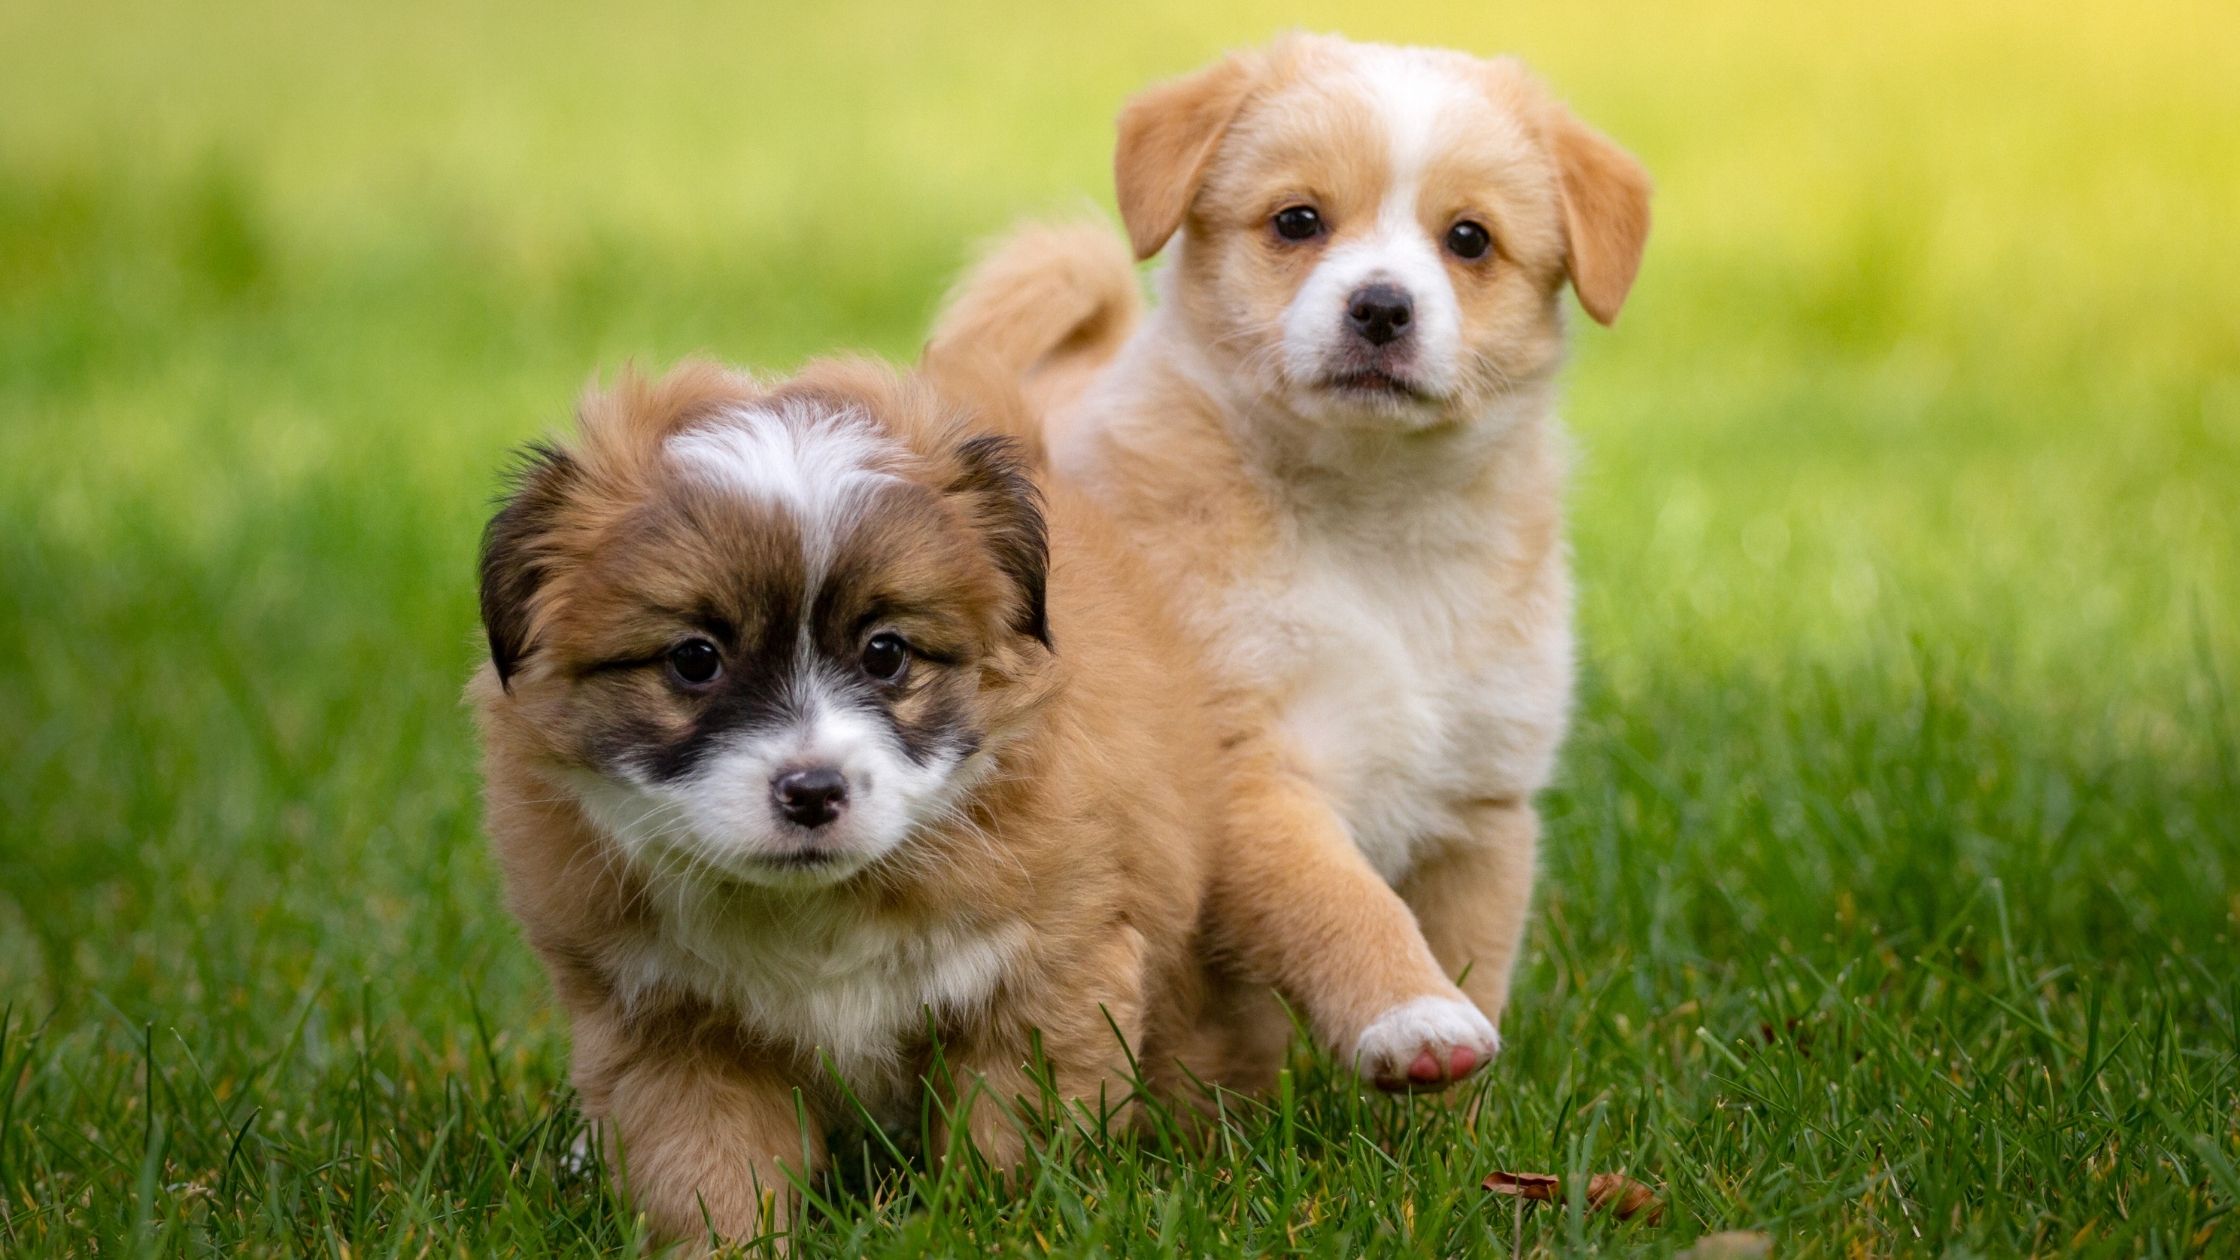 7 Adorable Dog Breeds We have Ever Seen